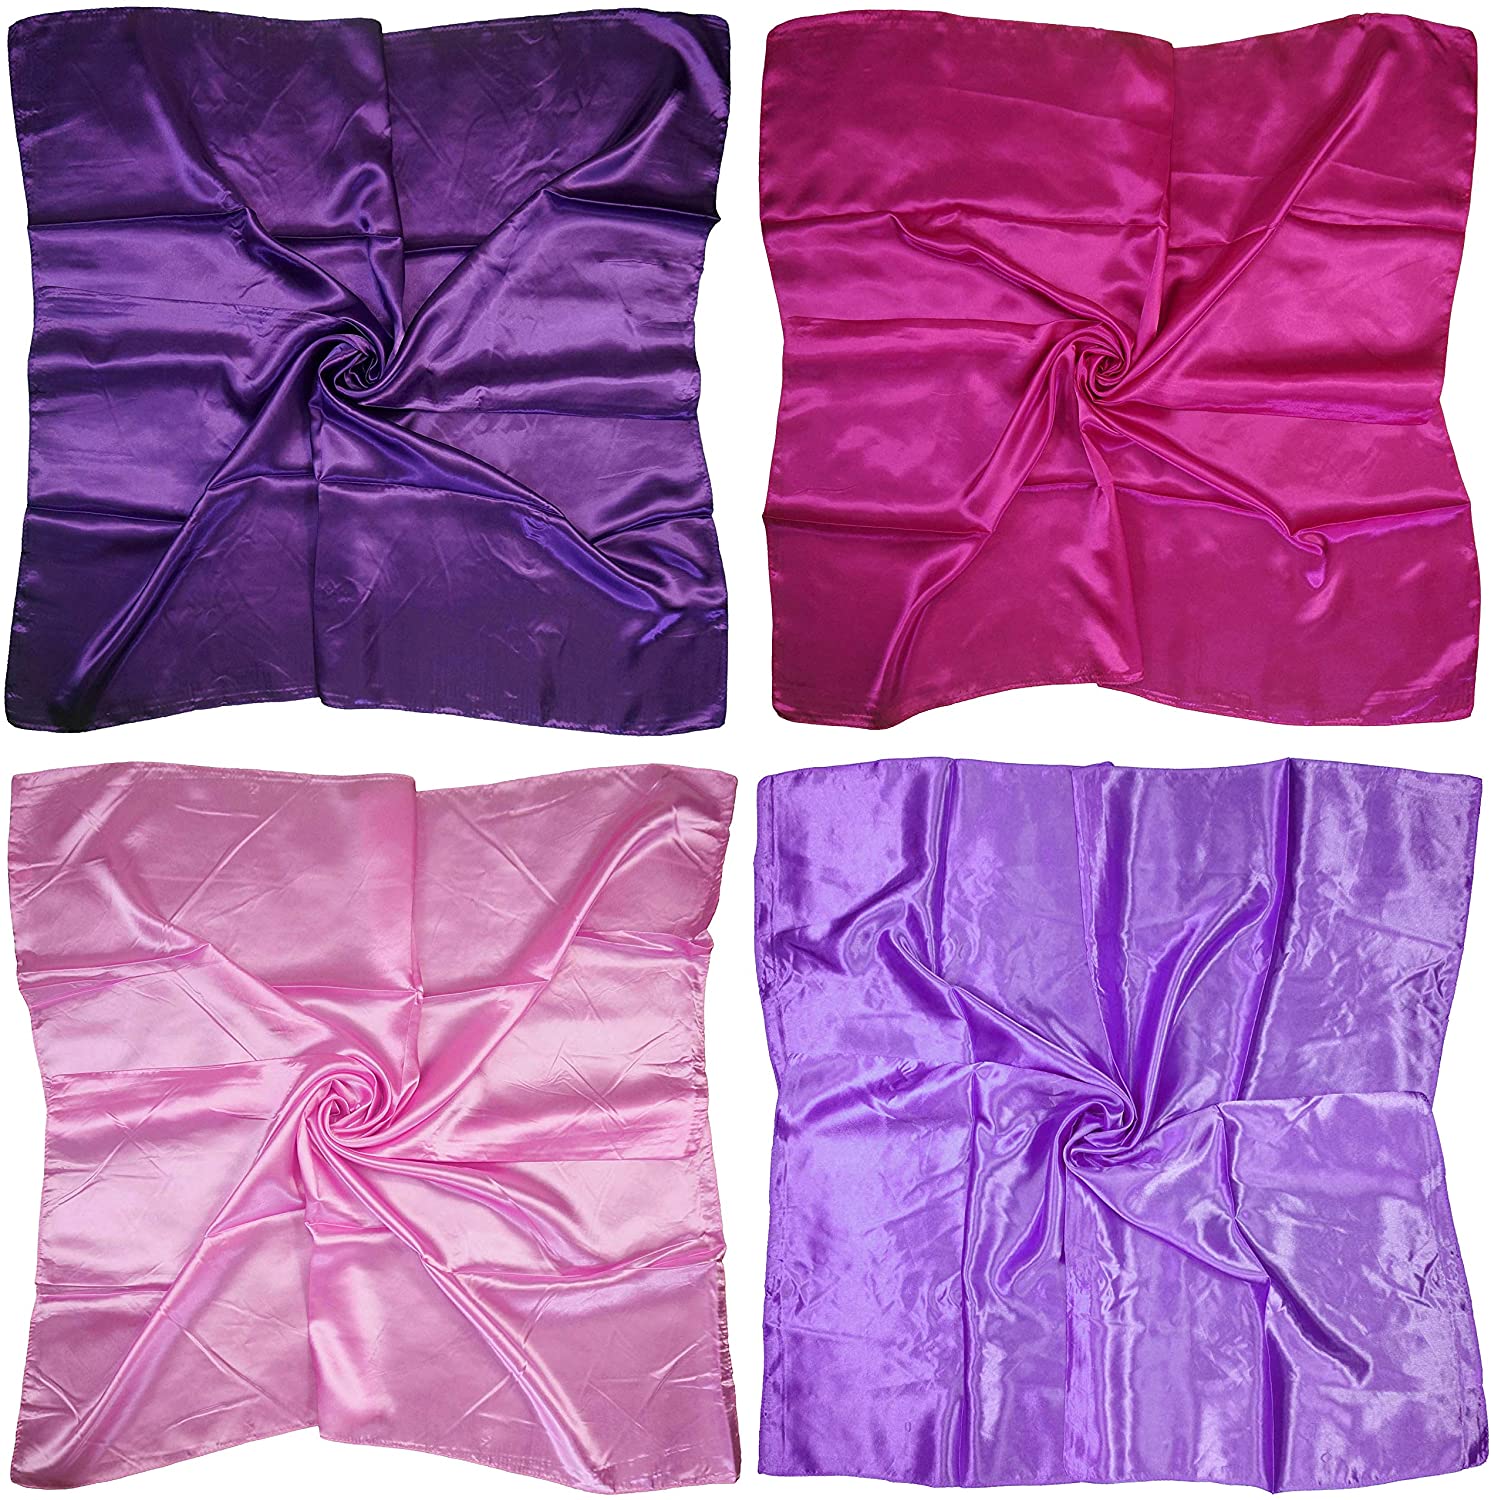 4 Pc Set Large 35 × 35 inches Satin Square Scarves Neck Hair Head Scarf Bundle 